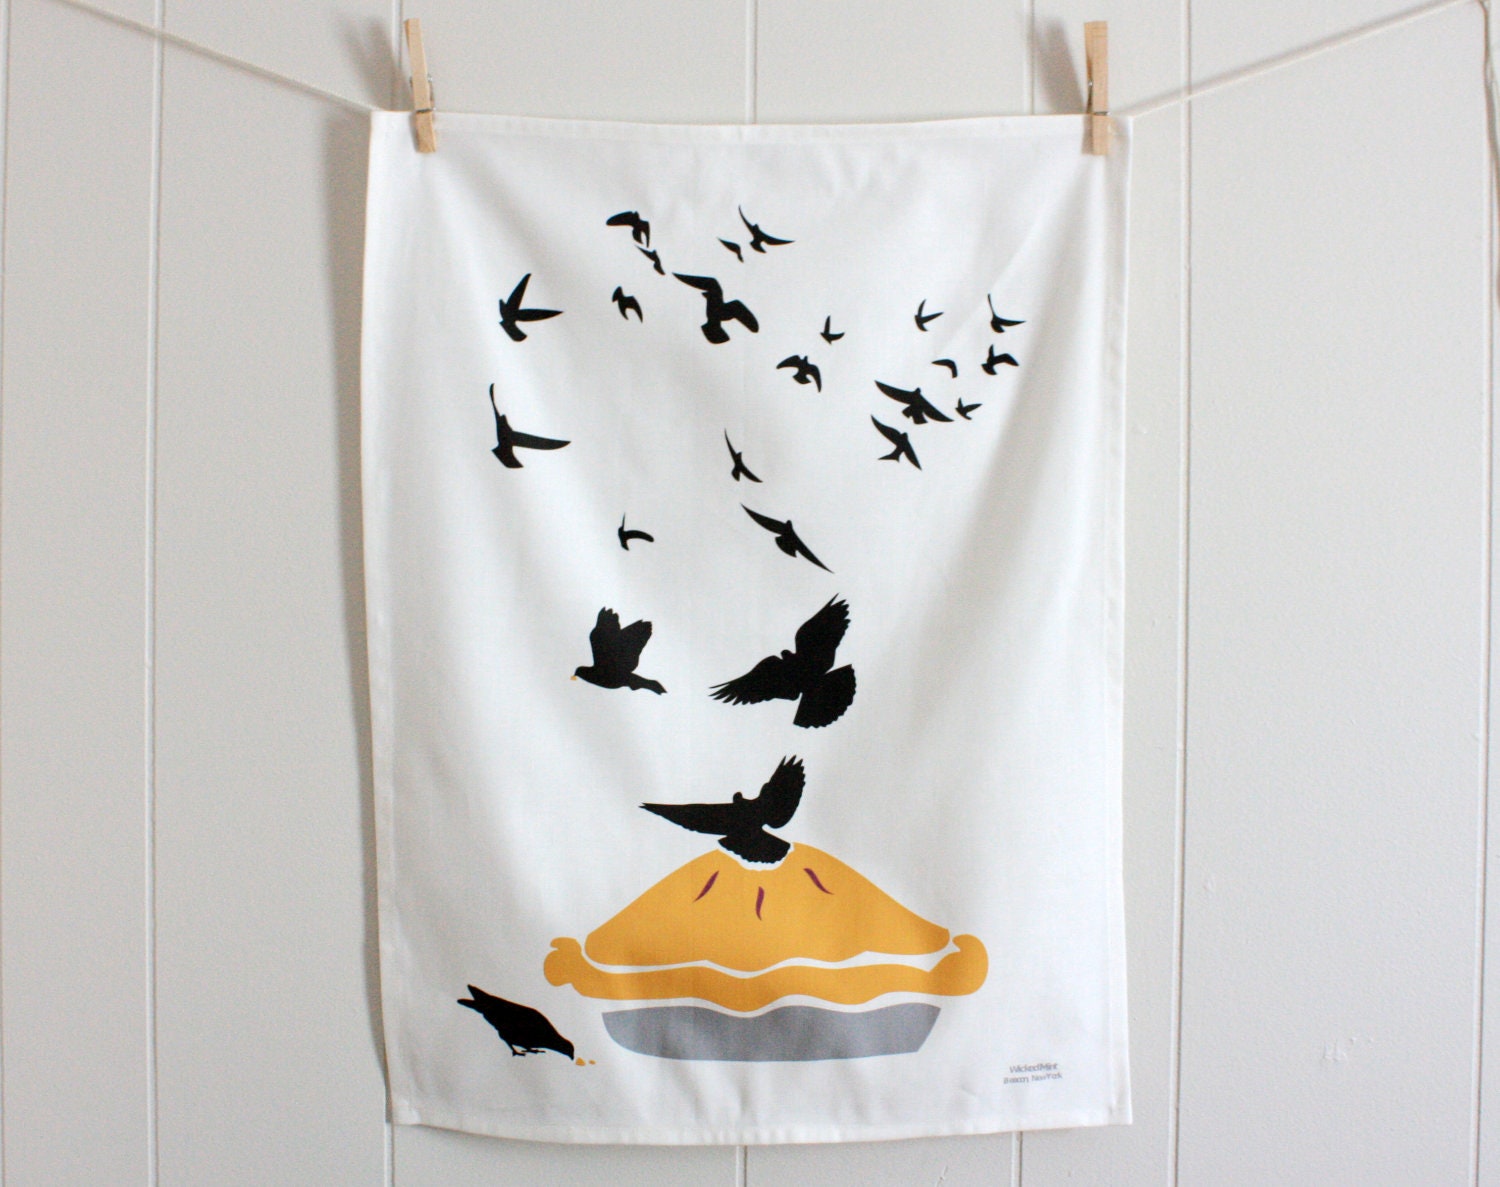 Blackbirds Baked in a Pie Tea Towel made from Linen Cotton blend - Perfect for Thanksgiving and the Holidays18 x 24 inch - wickedmint